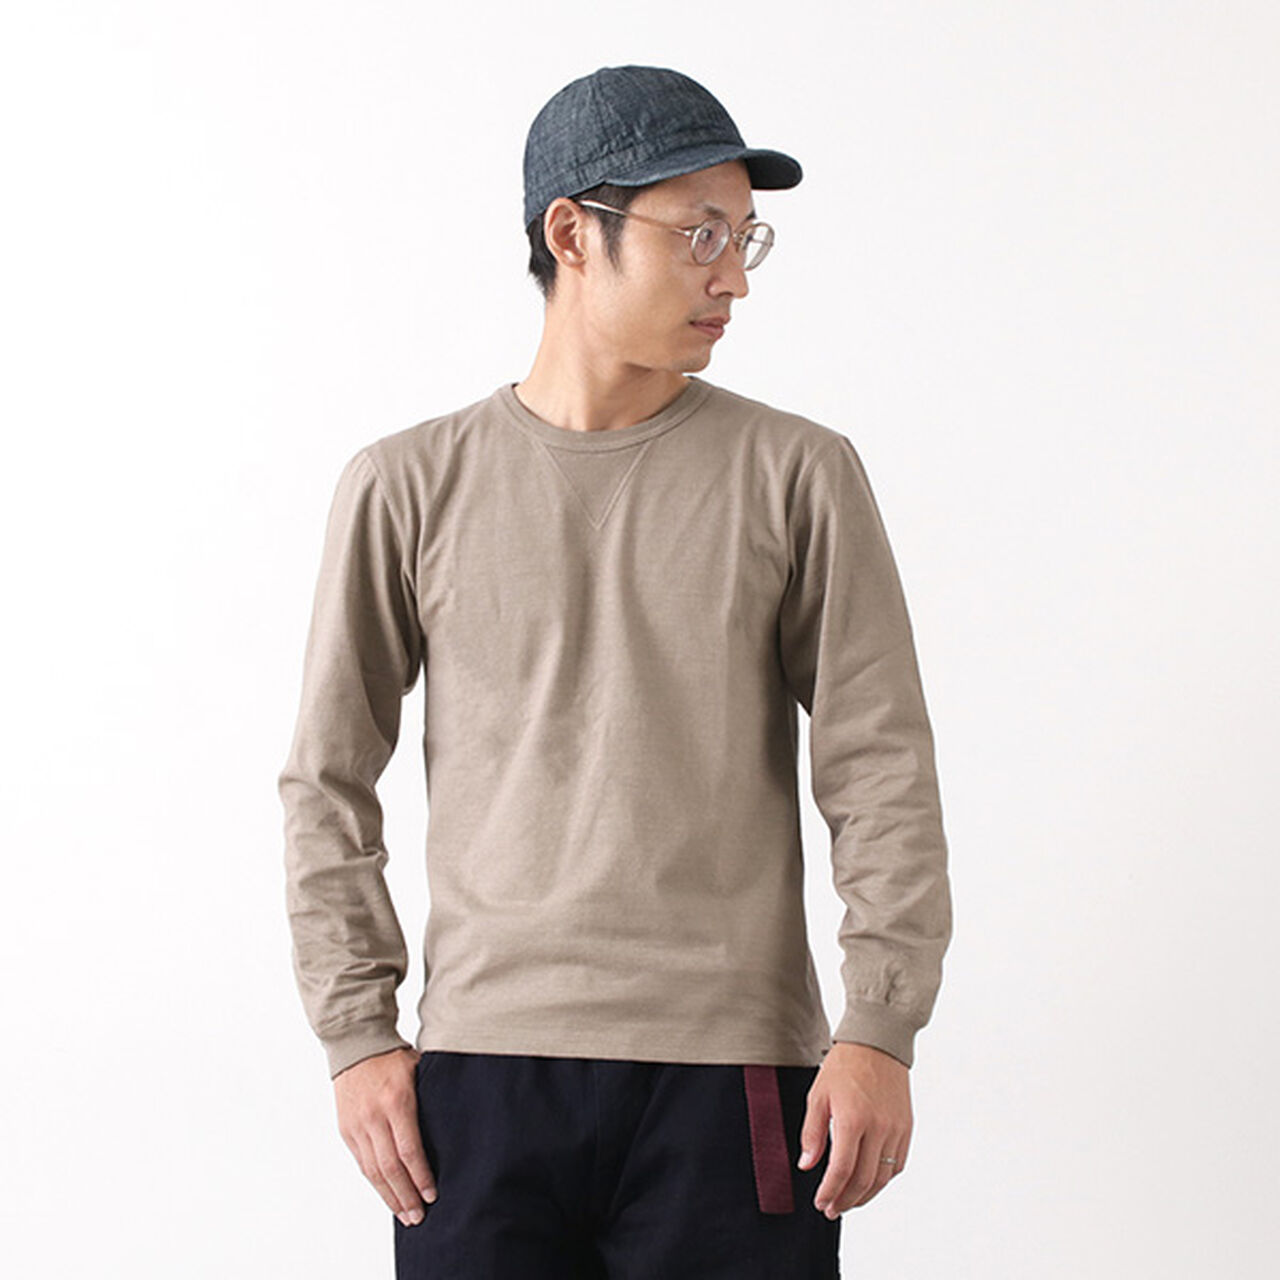 BR-3043 Small Knitted Vintage L/S Crew Neck T-Shirt,Khaki, large image number 0